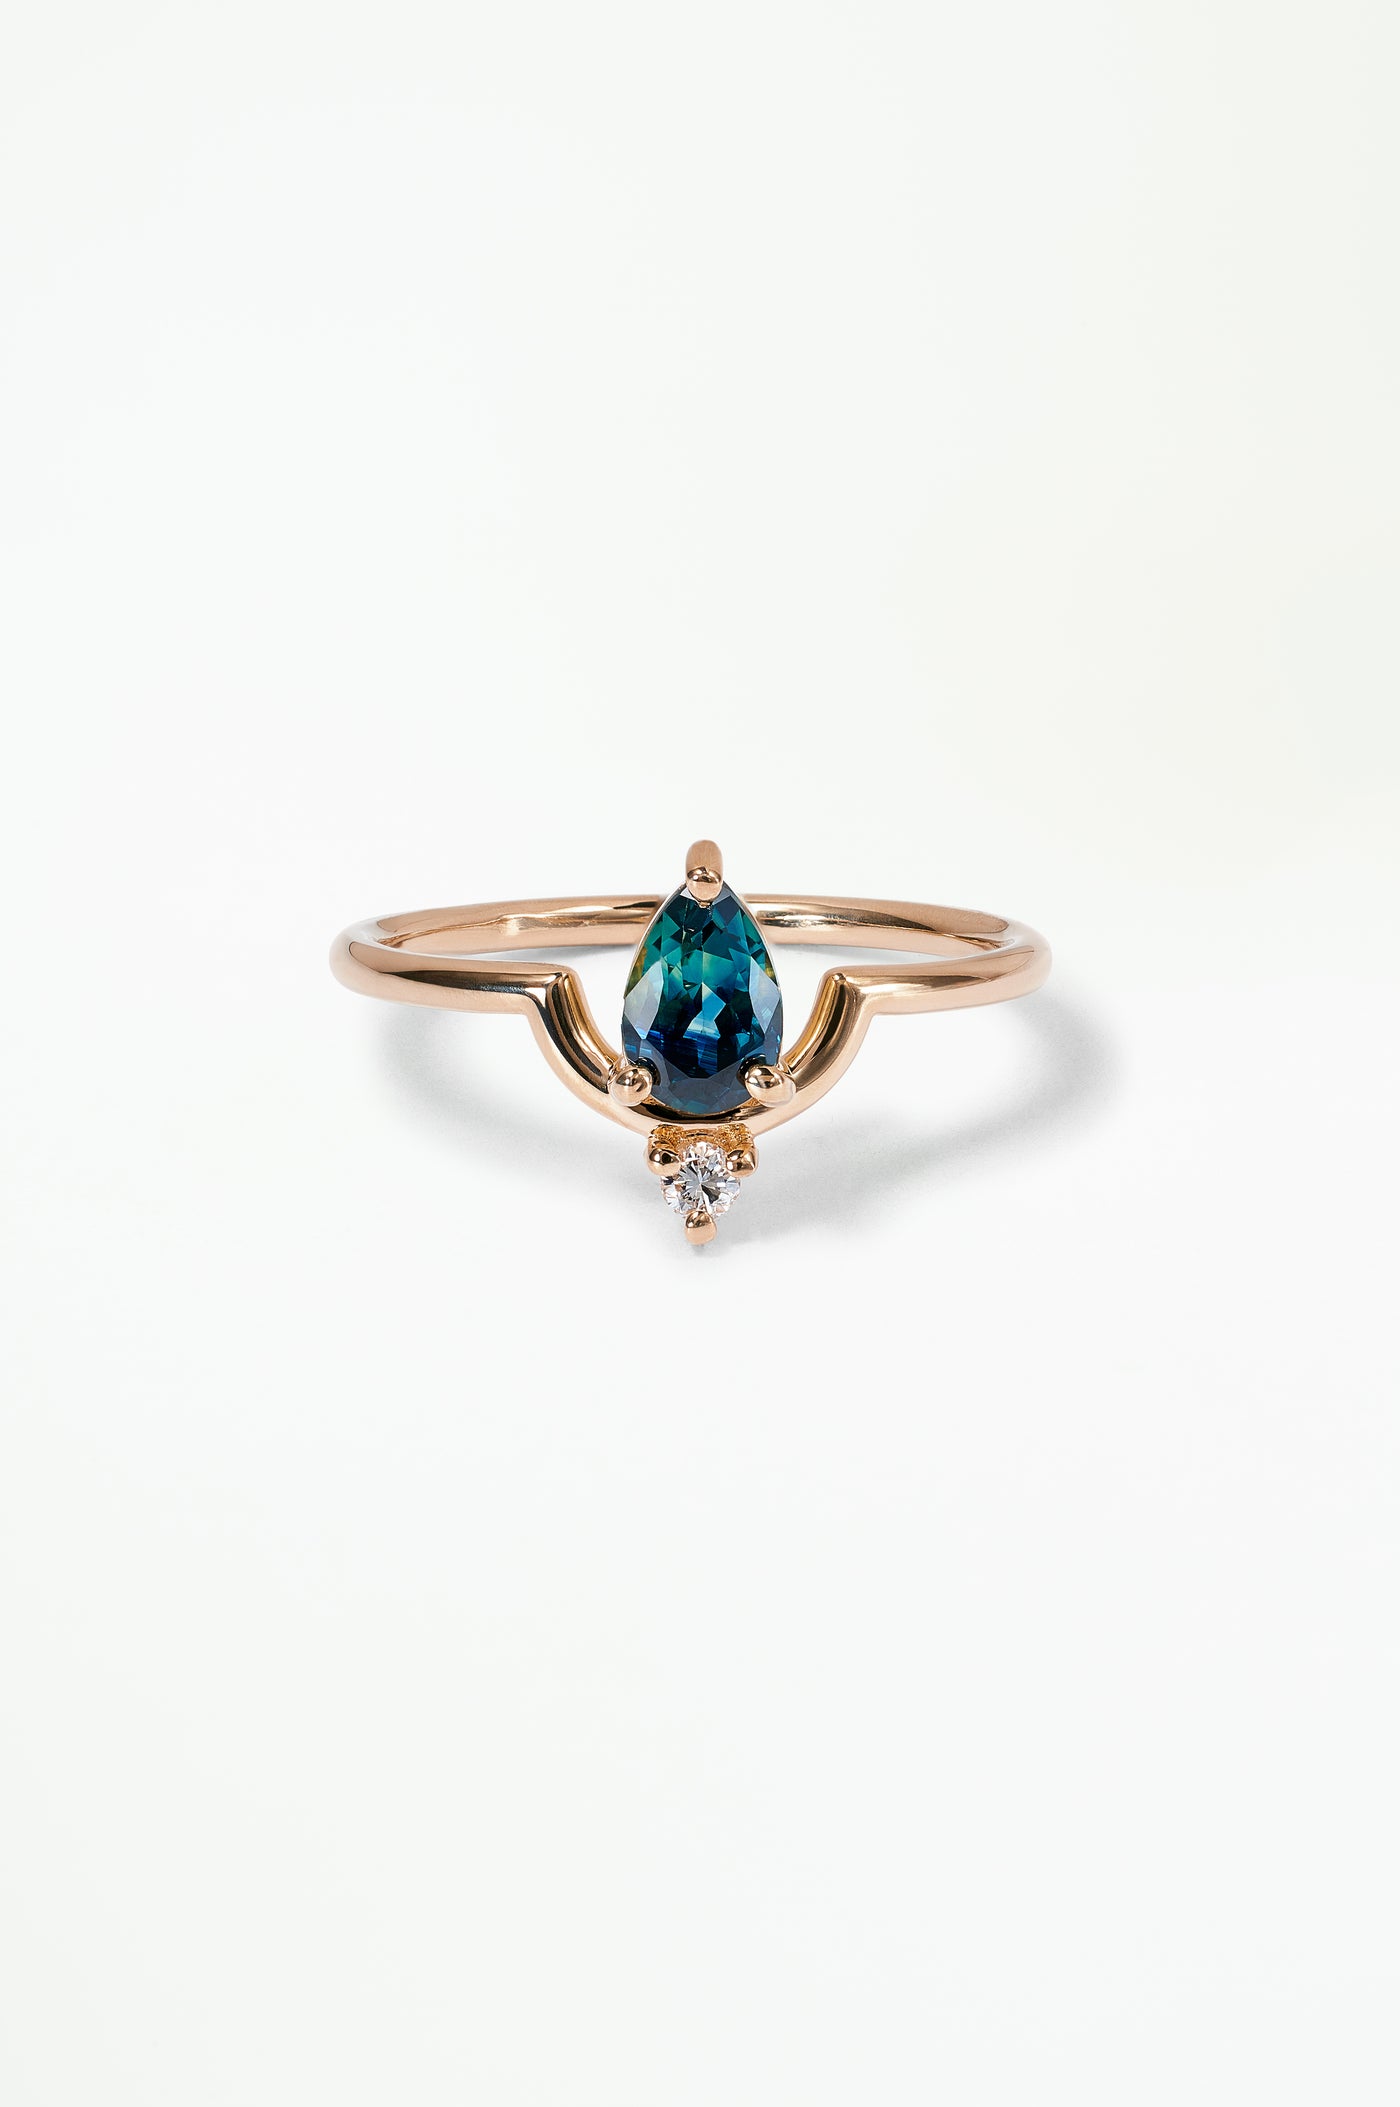 One of a Kind Pear Cut Sapphire and Diamond Nestled Ring No. 16